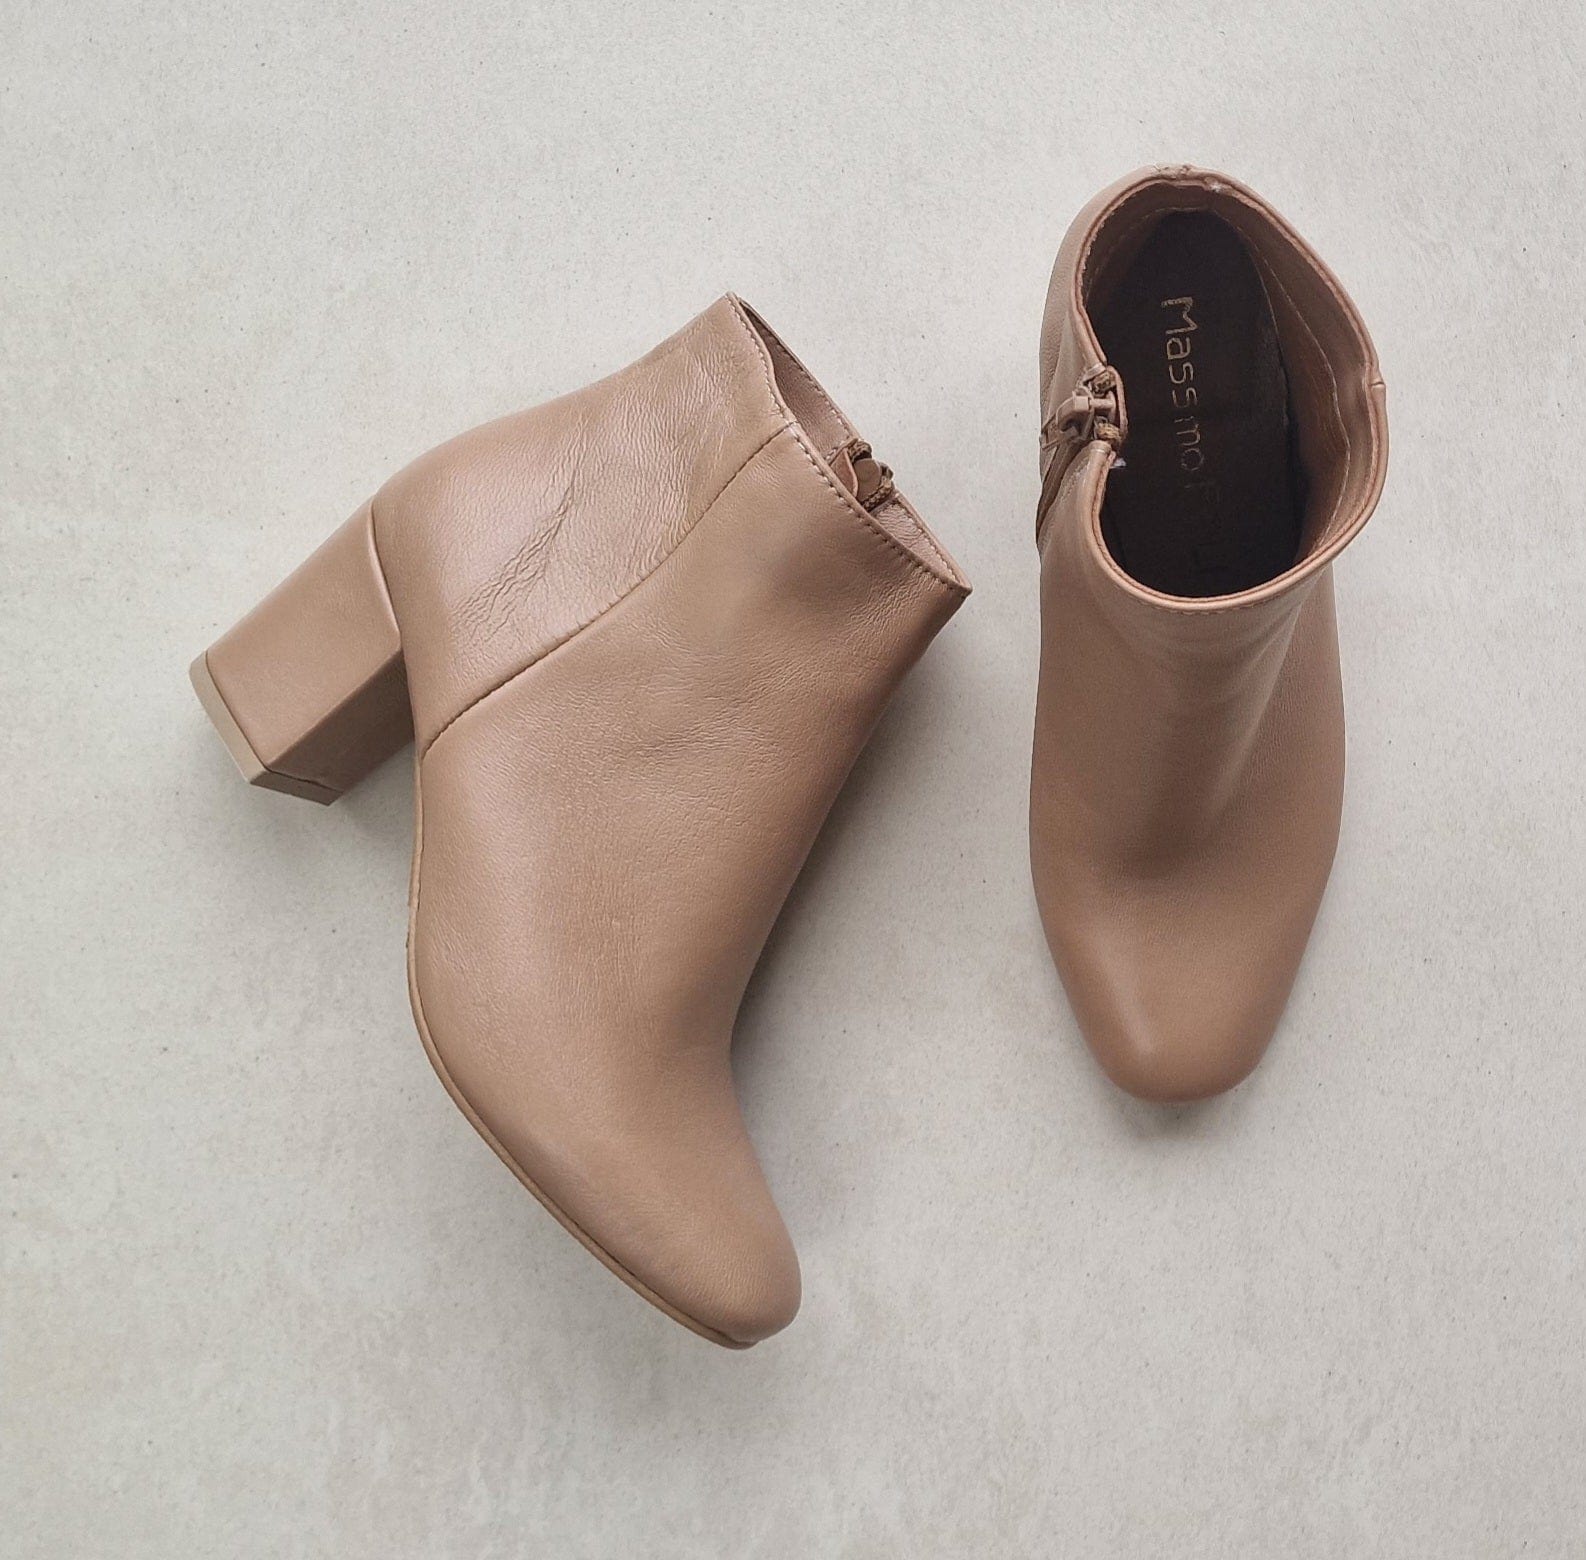 Almond toe mid heel ankle boots in nude leather